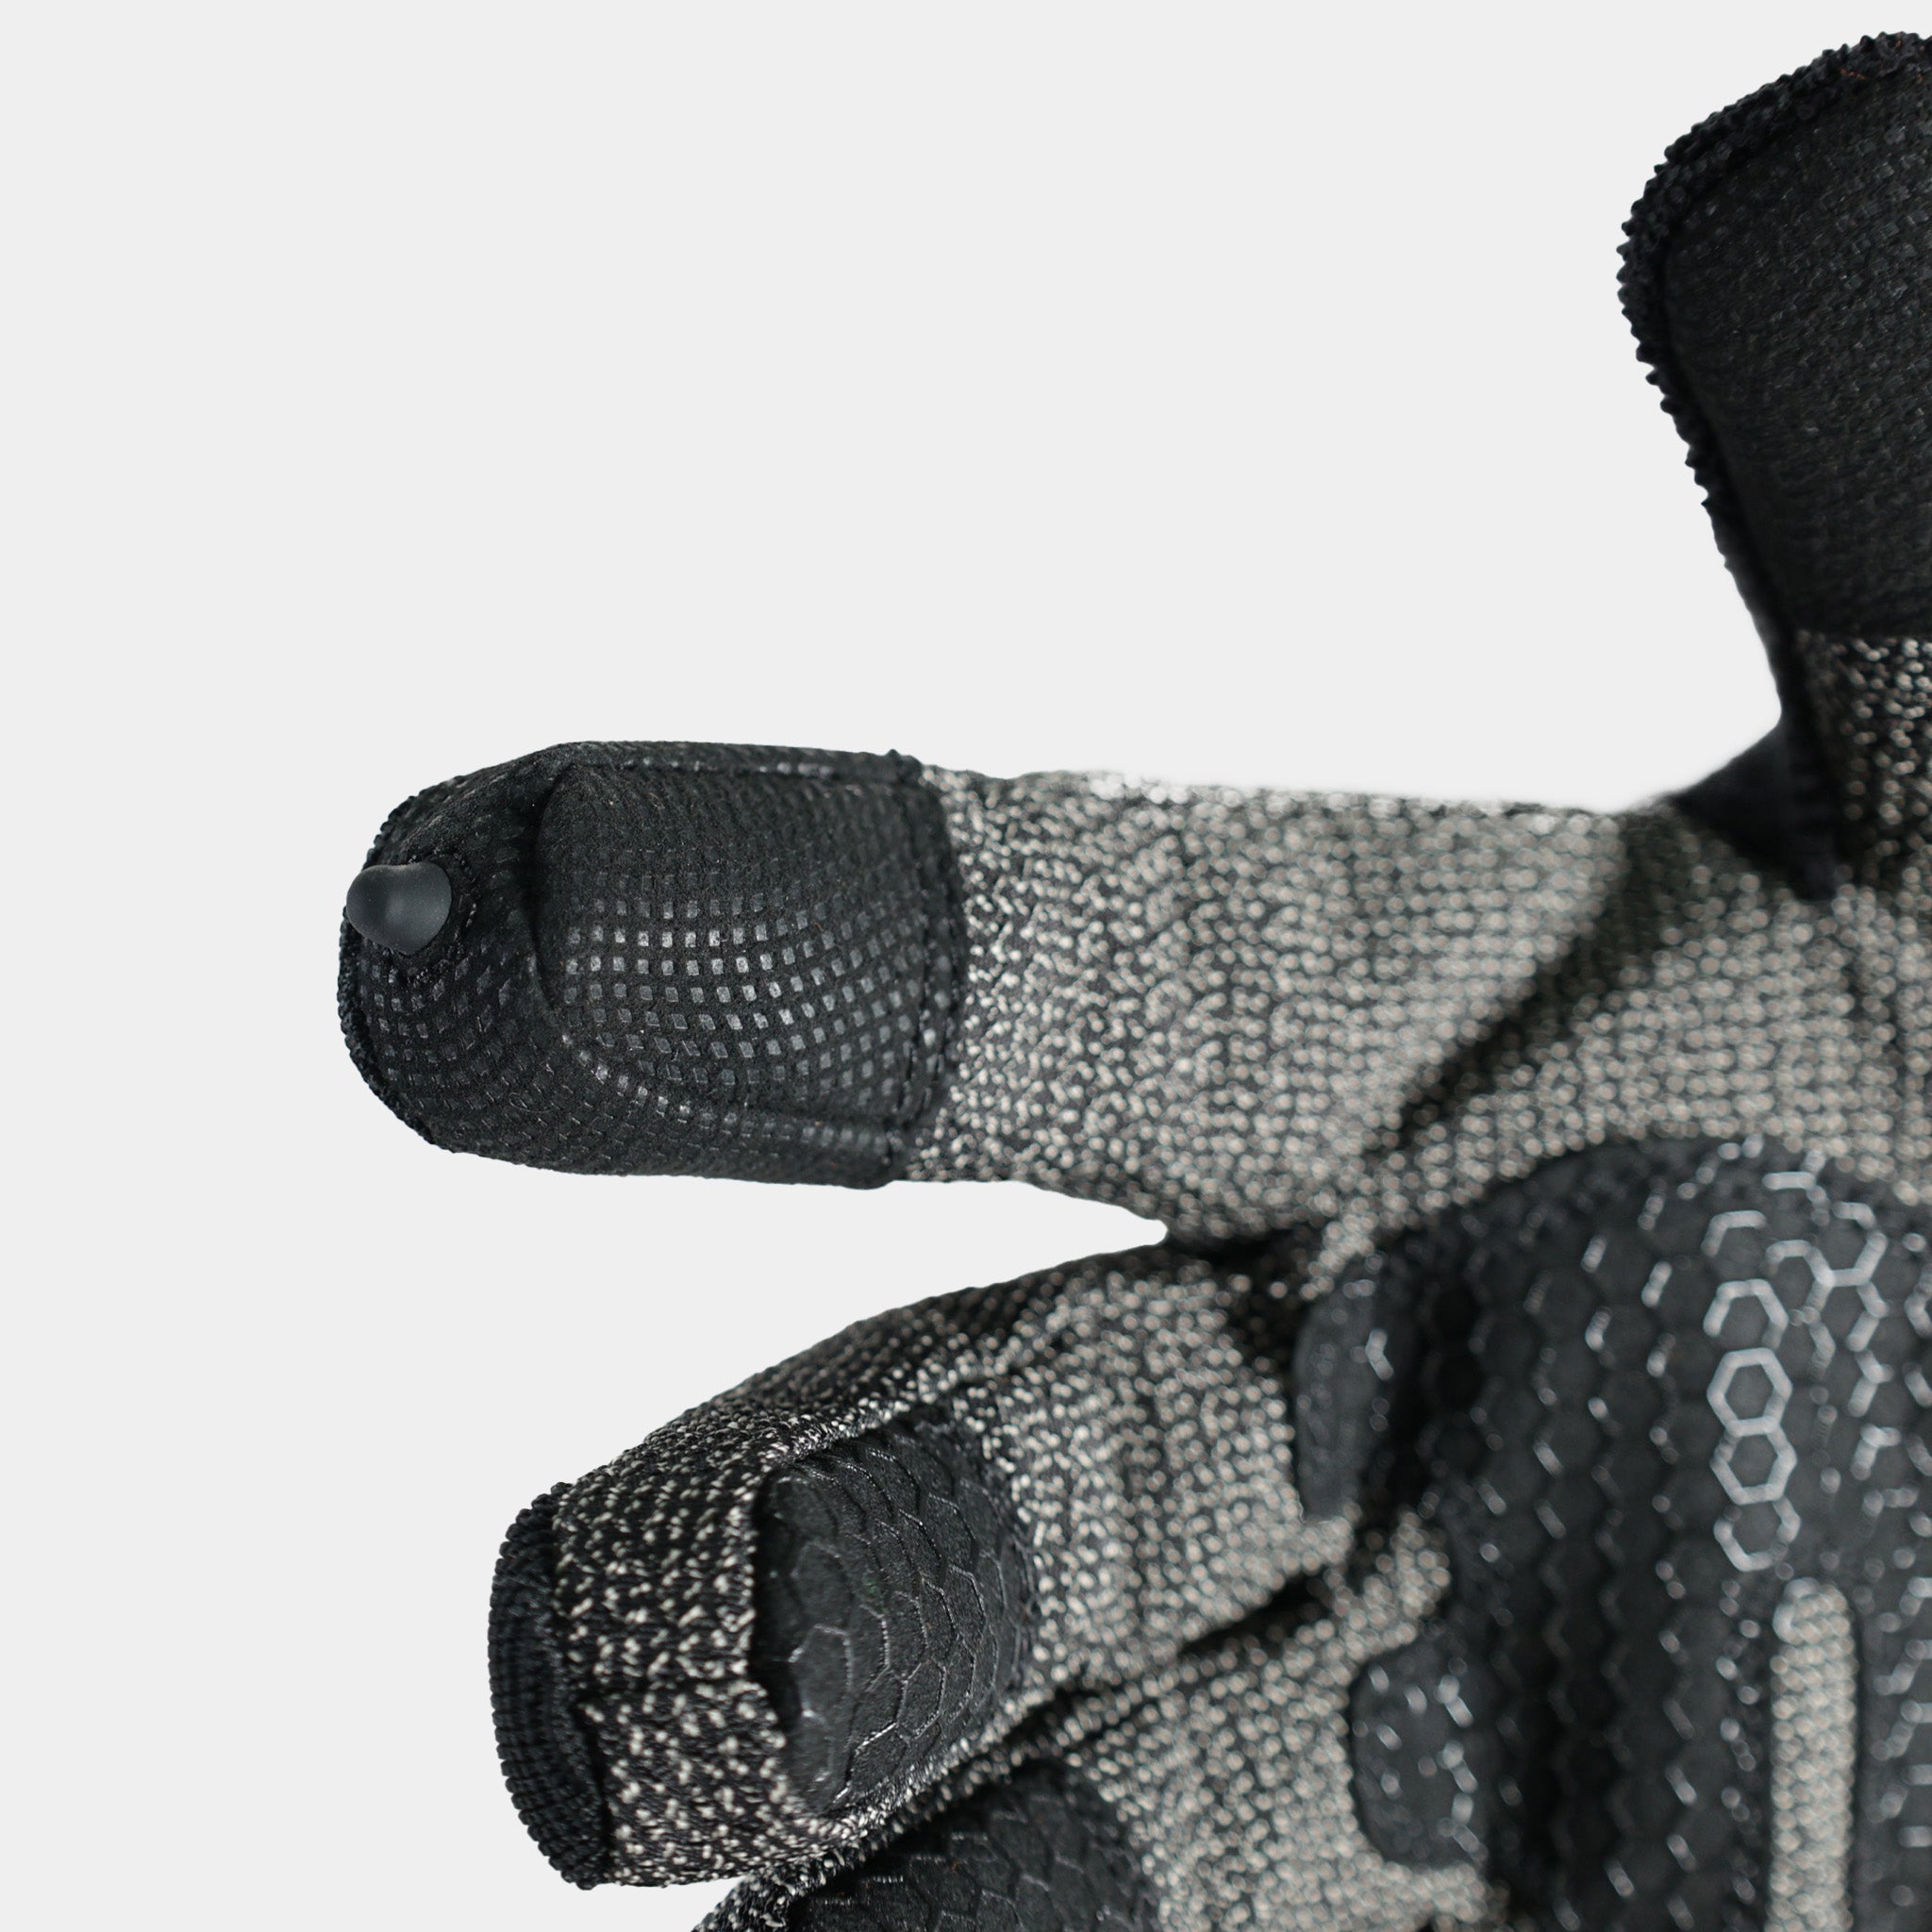 Cyber Touch-Screen Glove